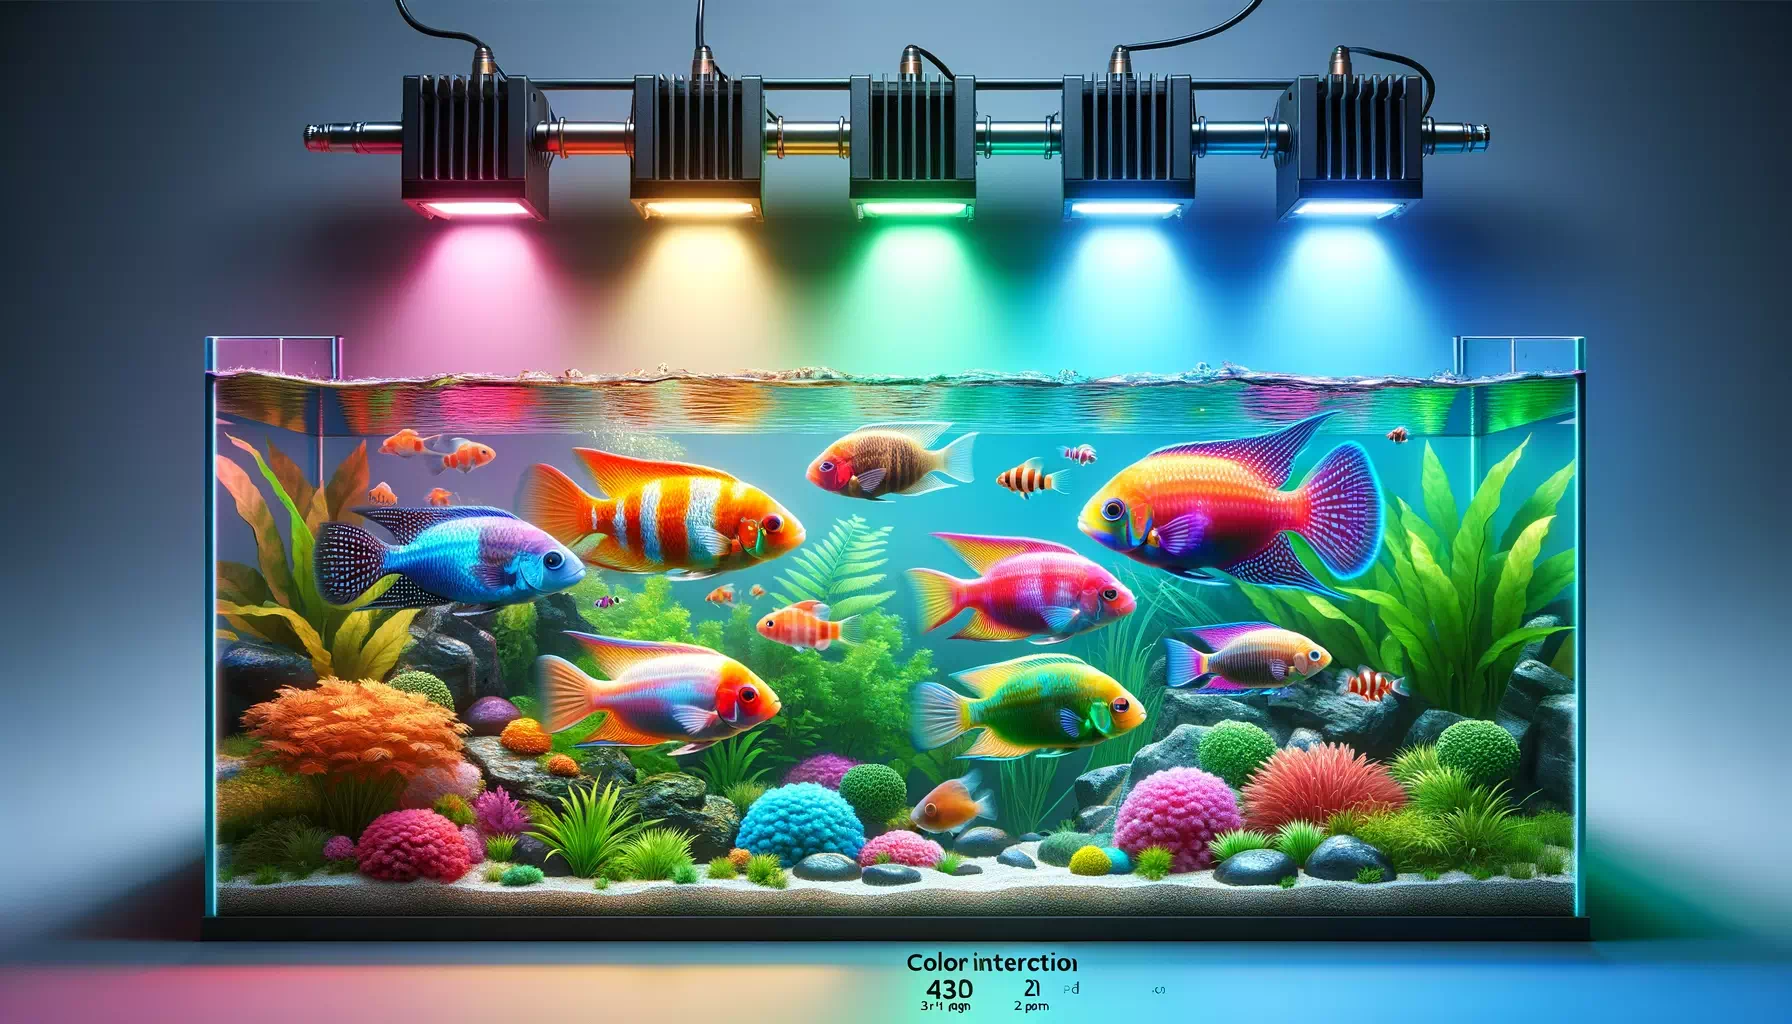 effects of color interaction and optimal lighting conditions in a GloFish tank. The scene should display GloFish of